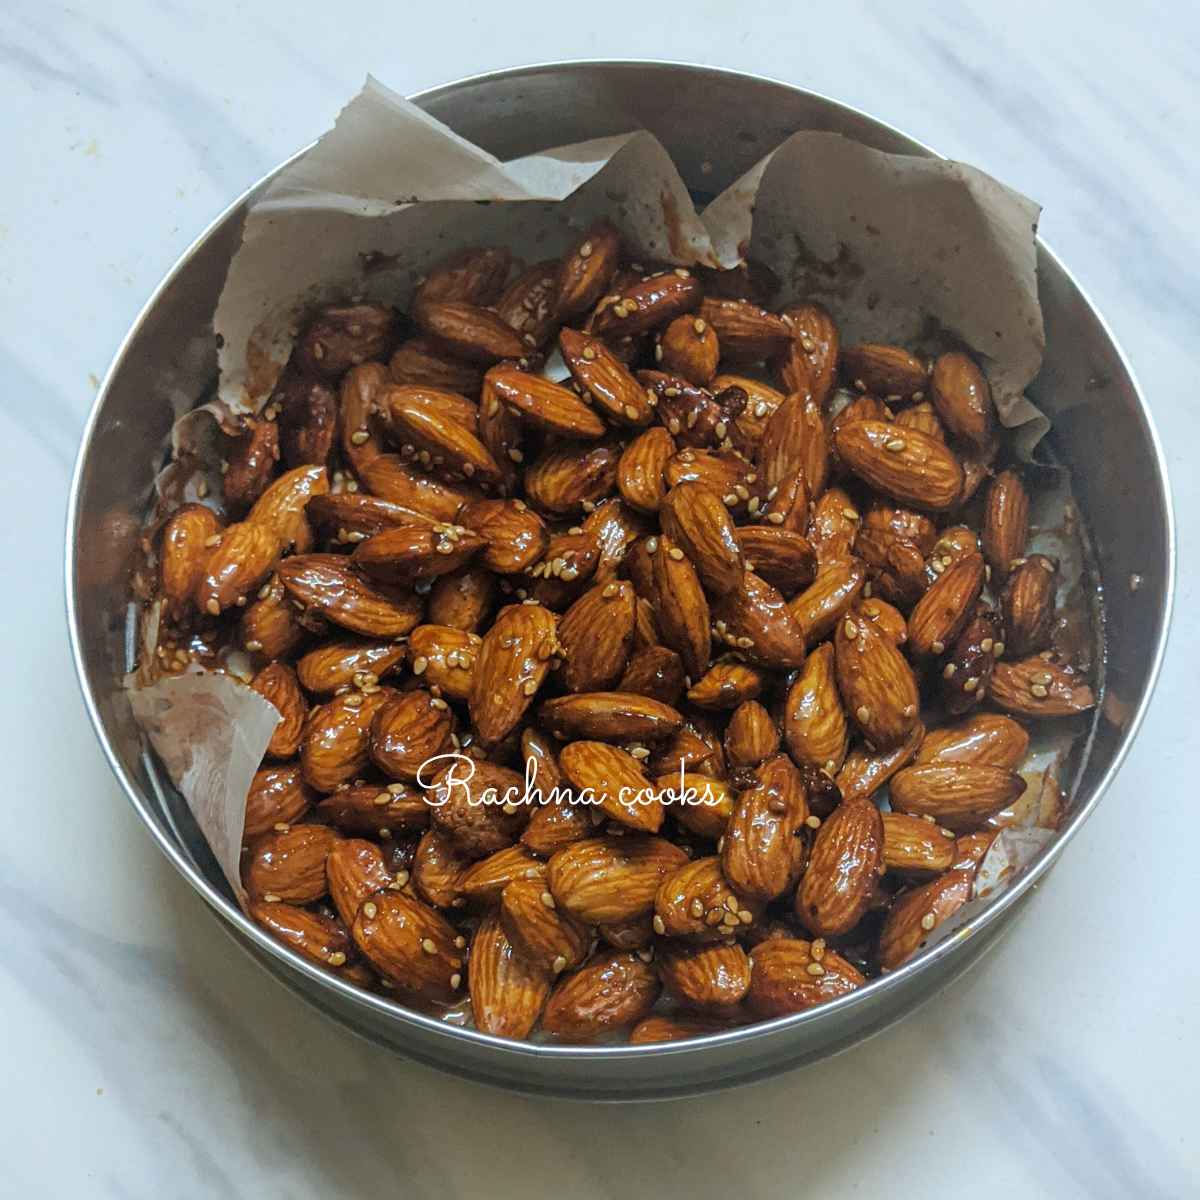 Roasted almonds in a cake tin lined with parchment paper.